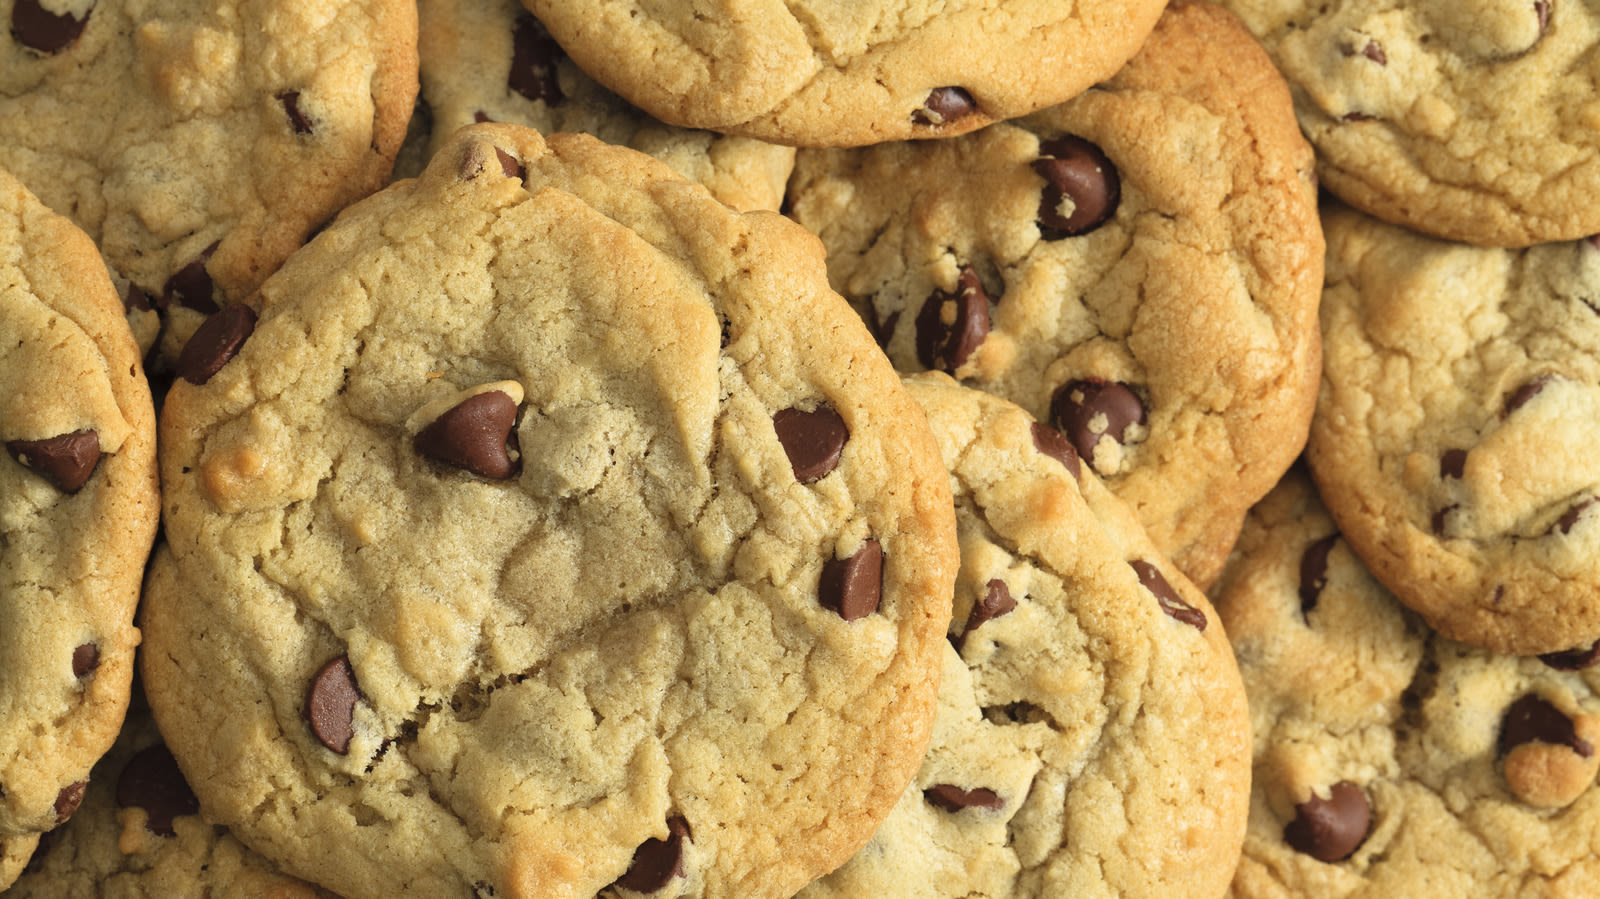 The Chocolate Chip Brand We Honestly Think Tastes Like Dirt